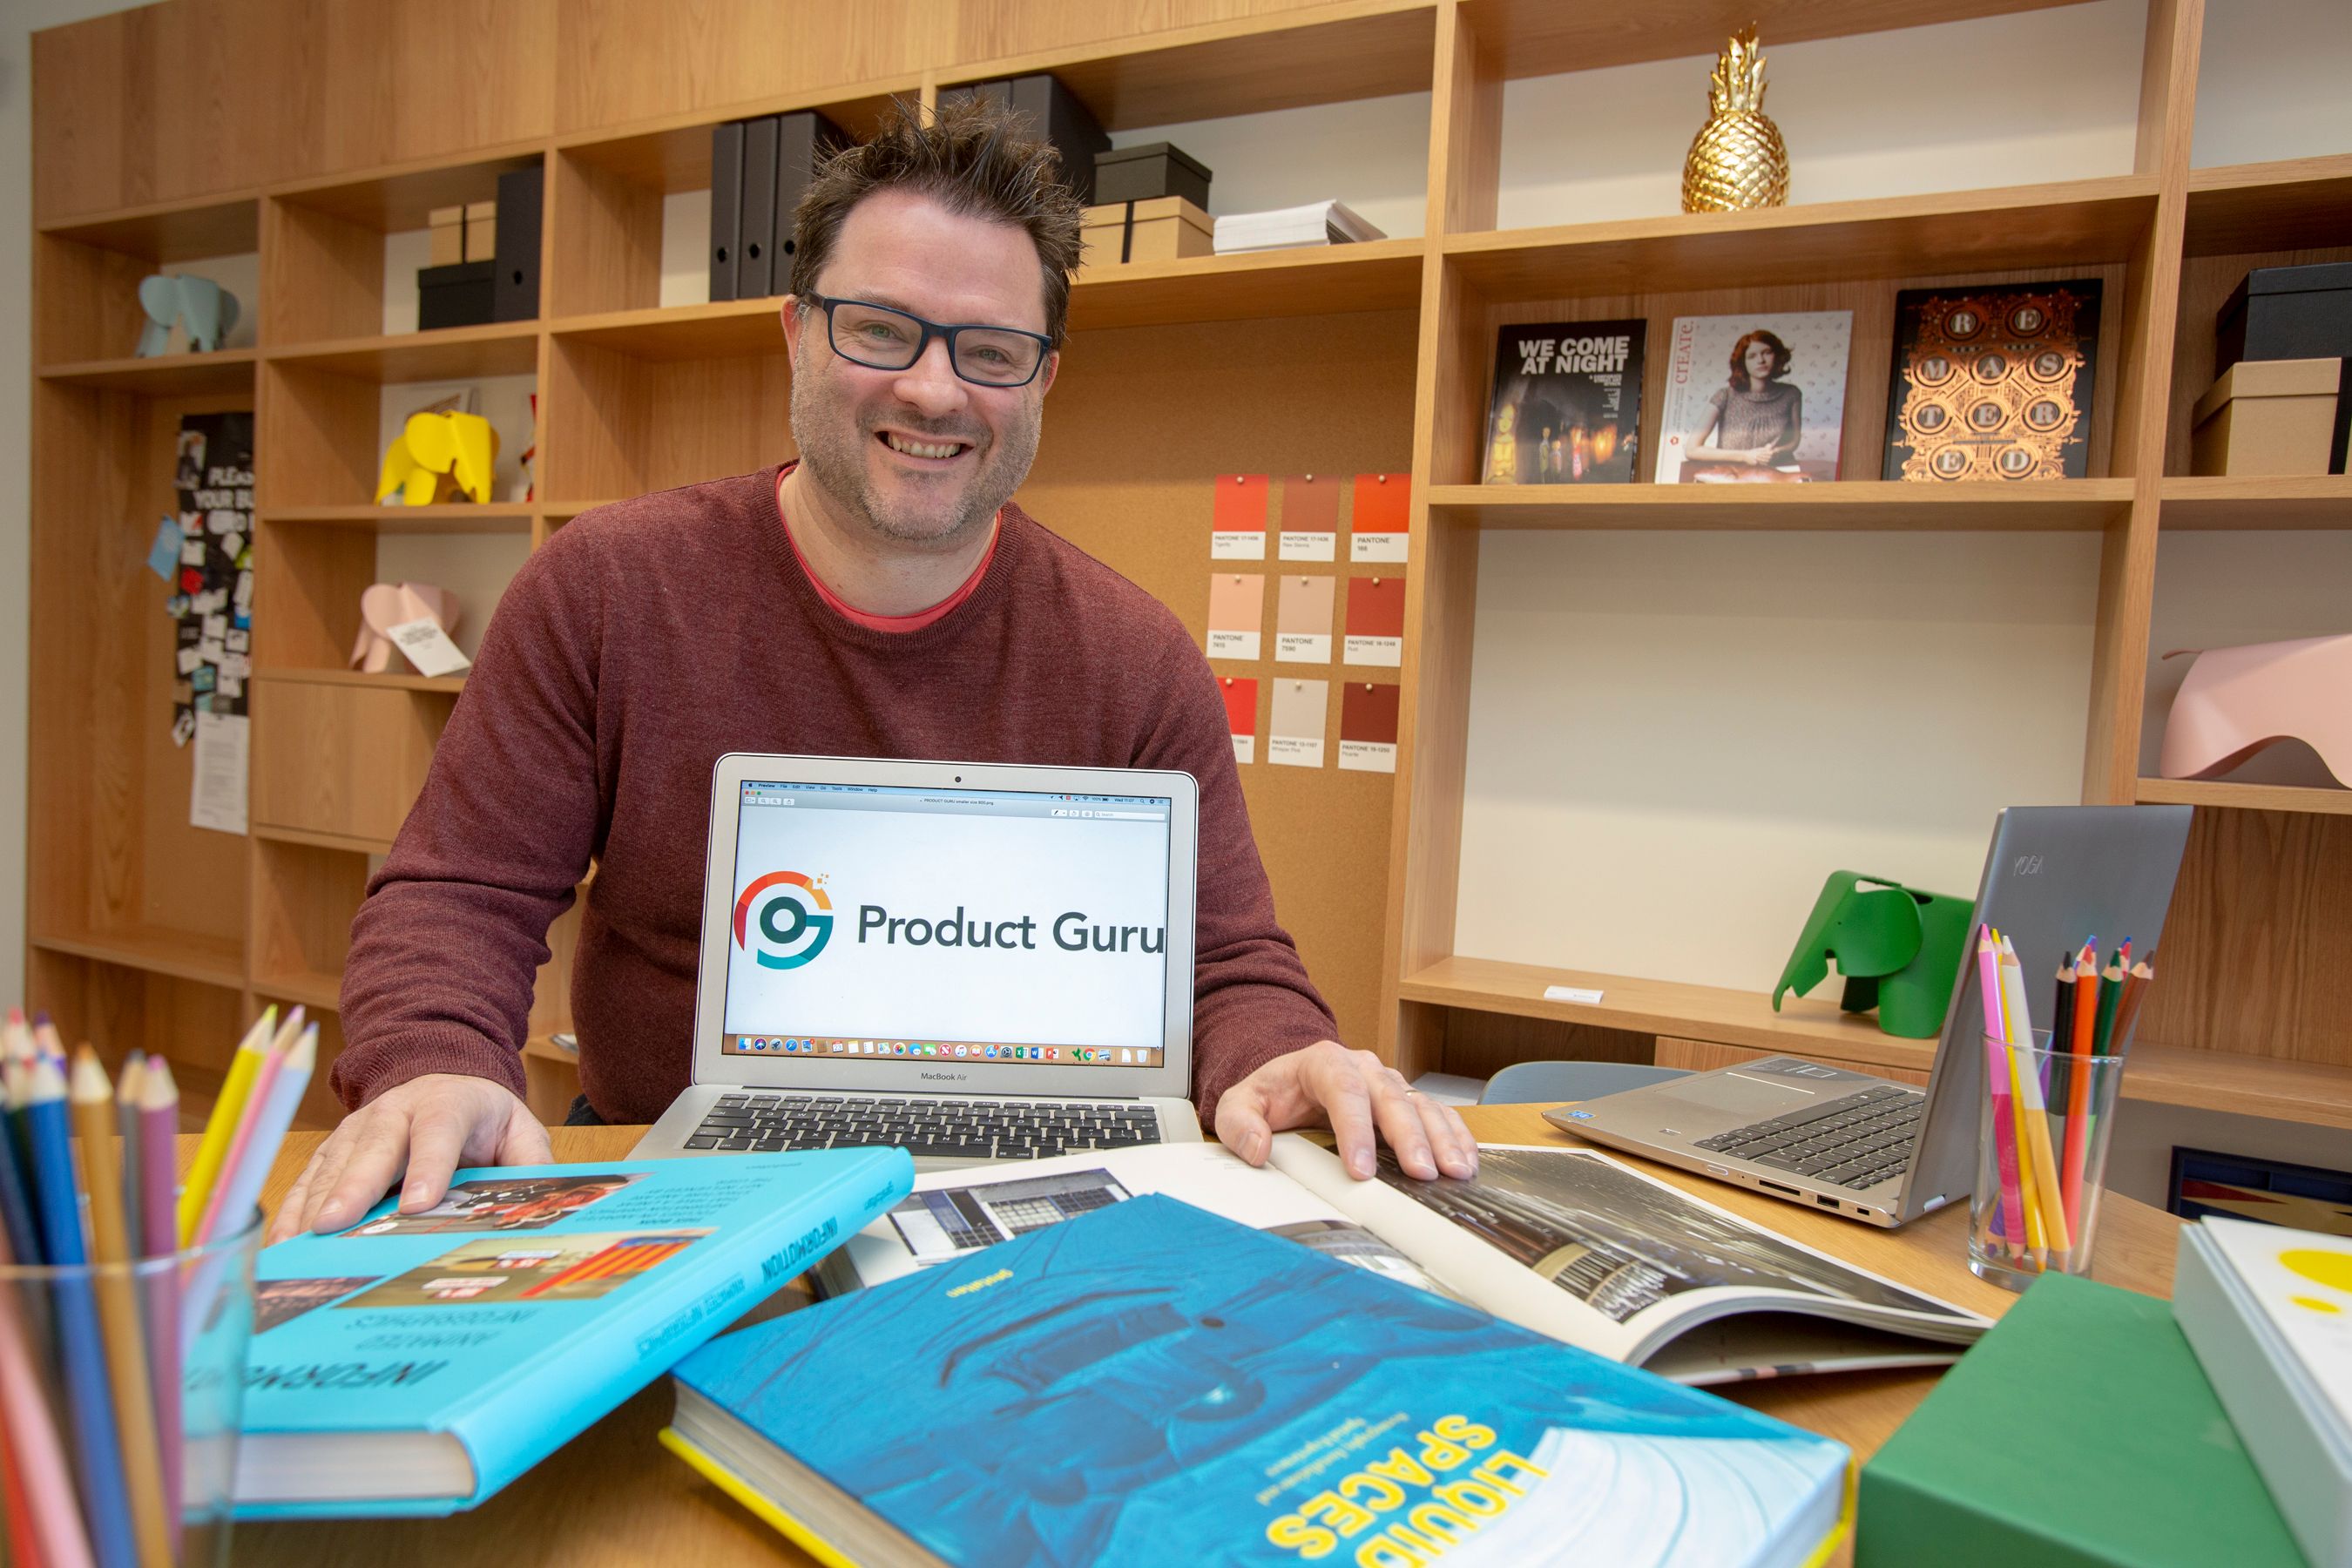 Glasgow-based Product Guru secures £330,000 from trio of investors